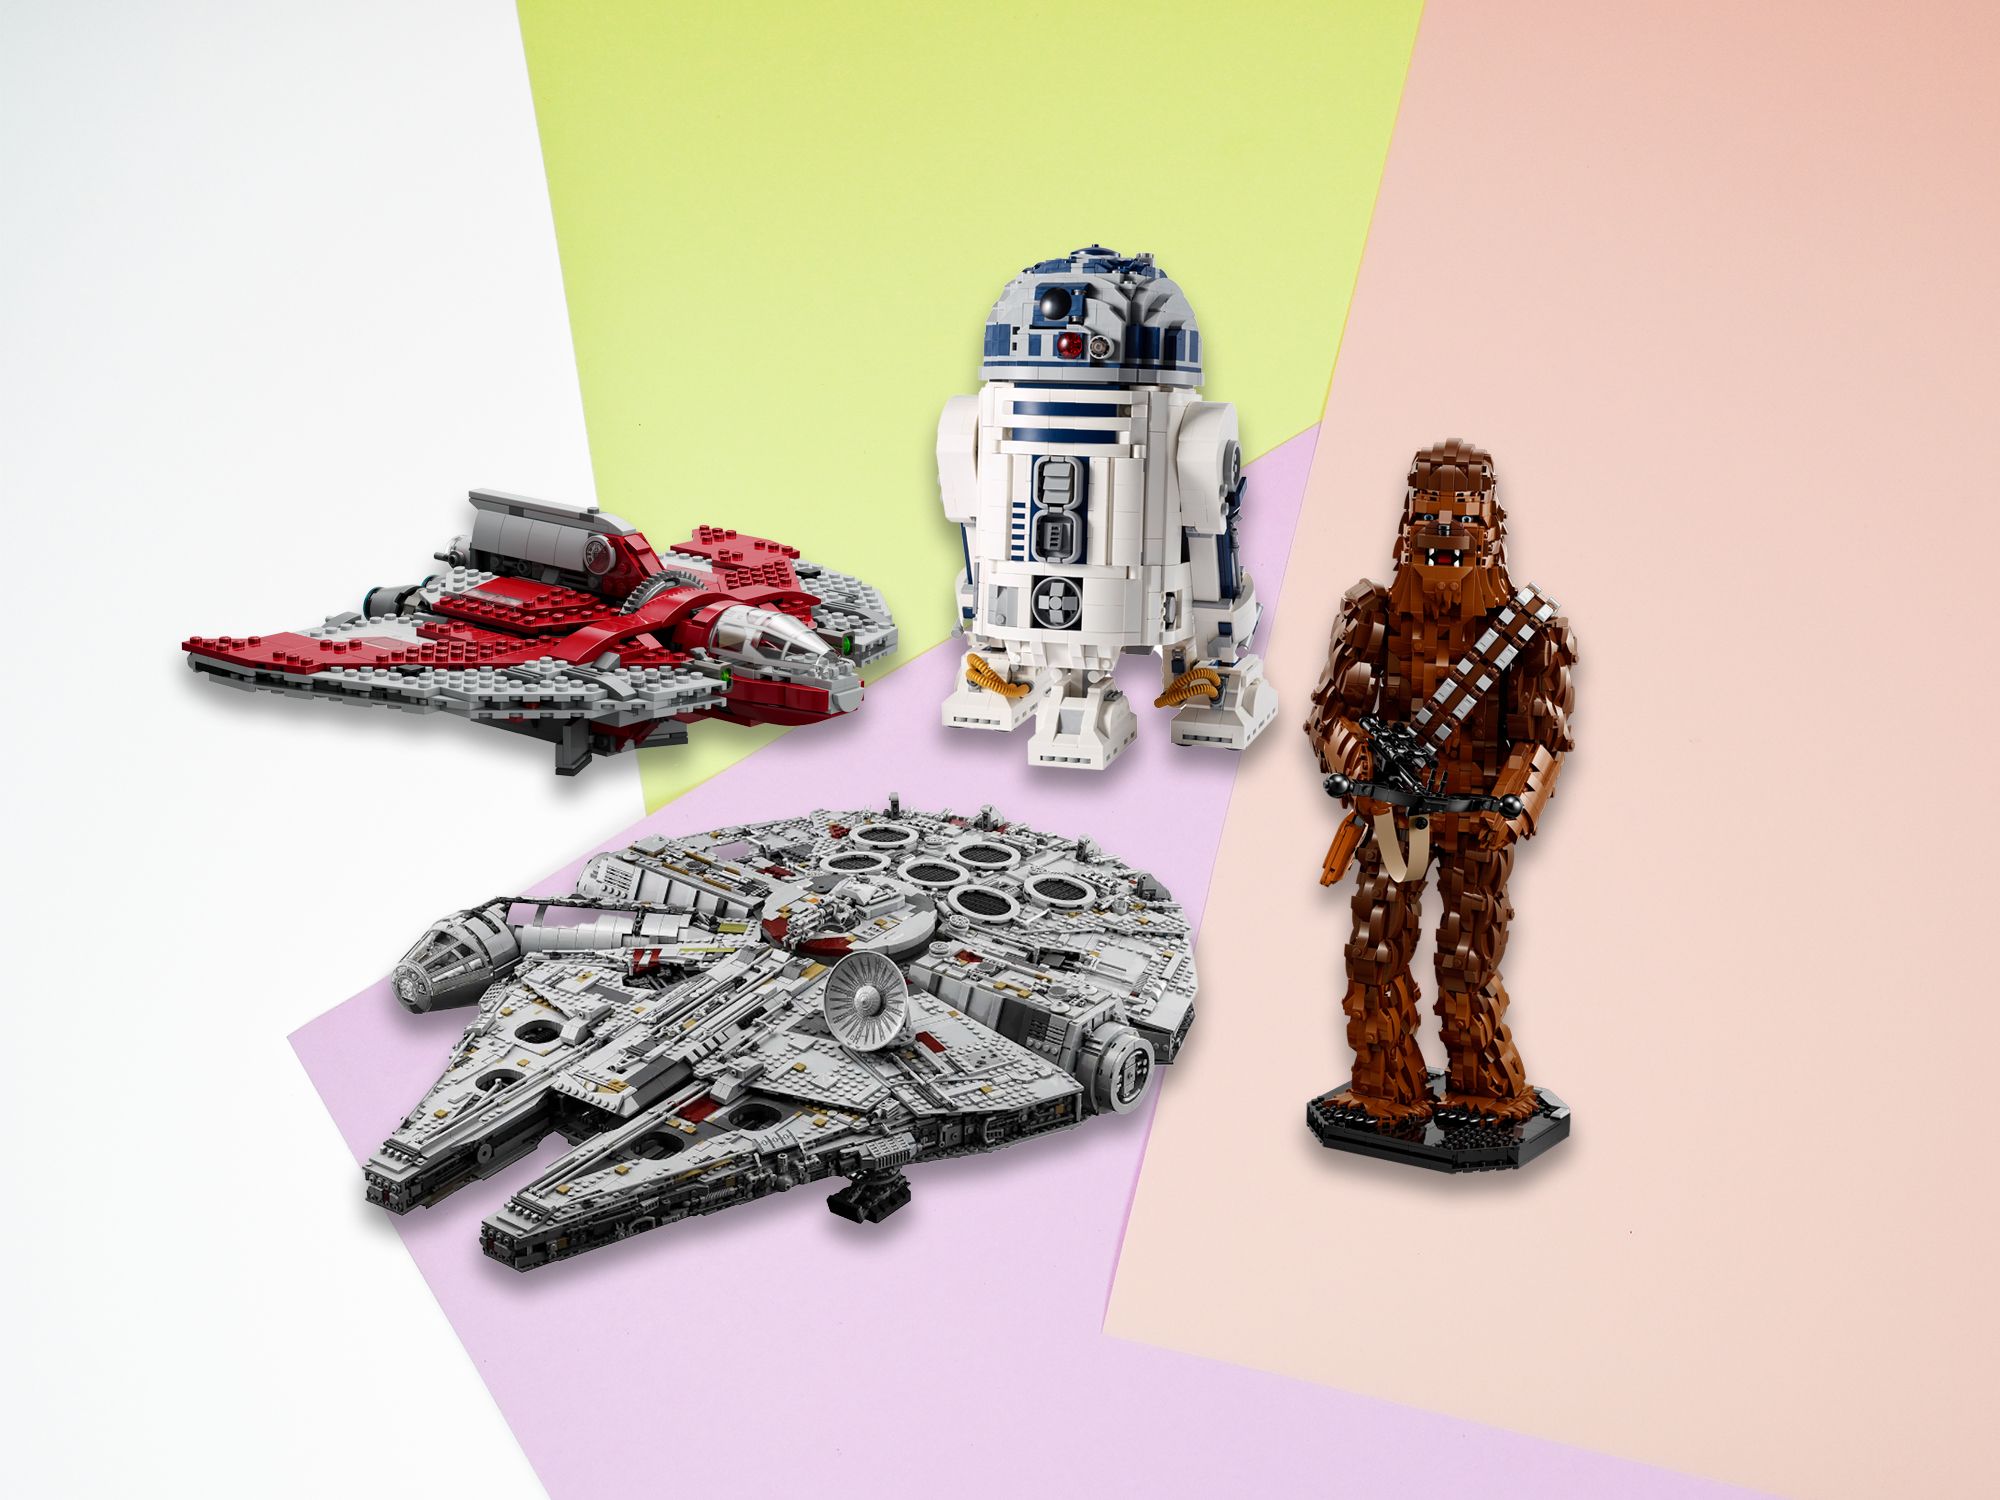 Best LEGO Star Wars Ultimate Collector's Series sets of all time